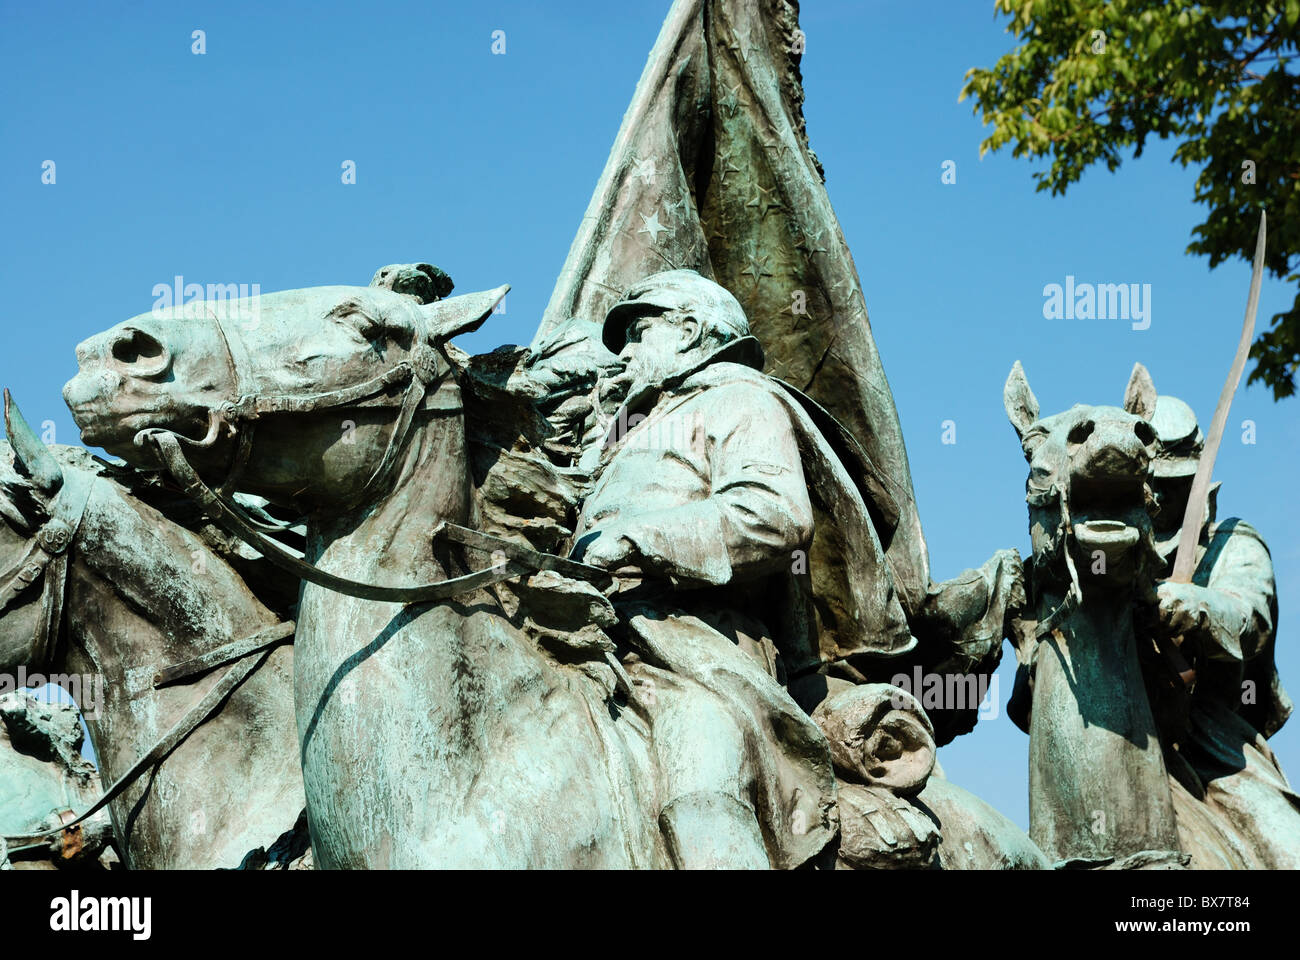 Ulysses S Grant Memorial in Washington DC. Detail of Civil War soldiers during cavalry charge. Stock Photo